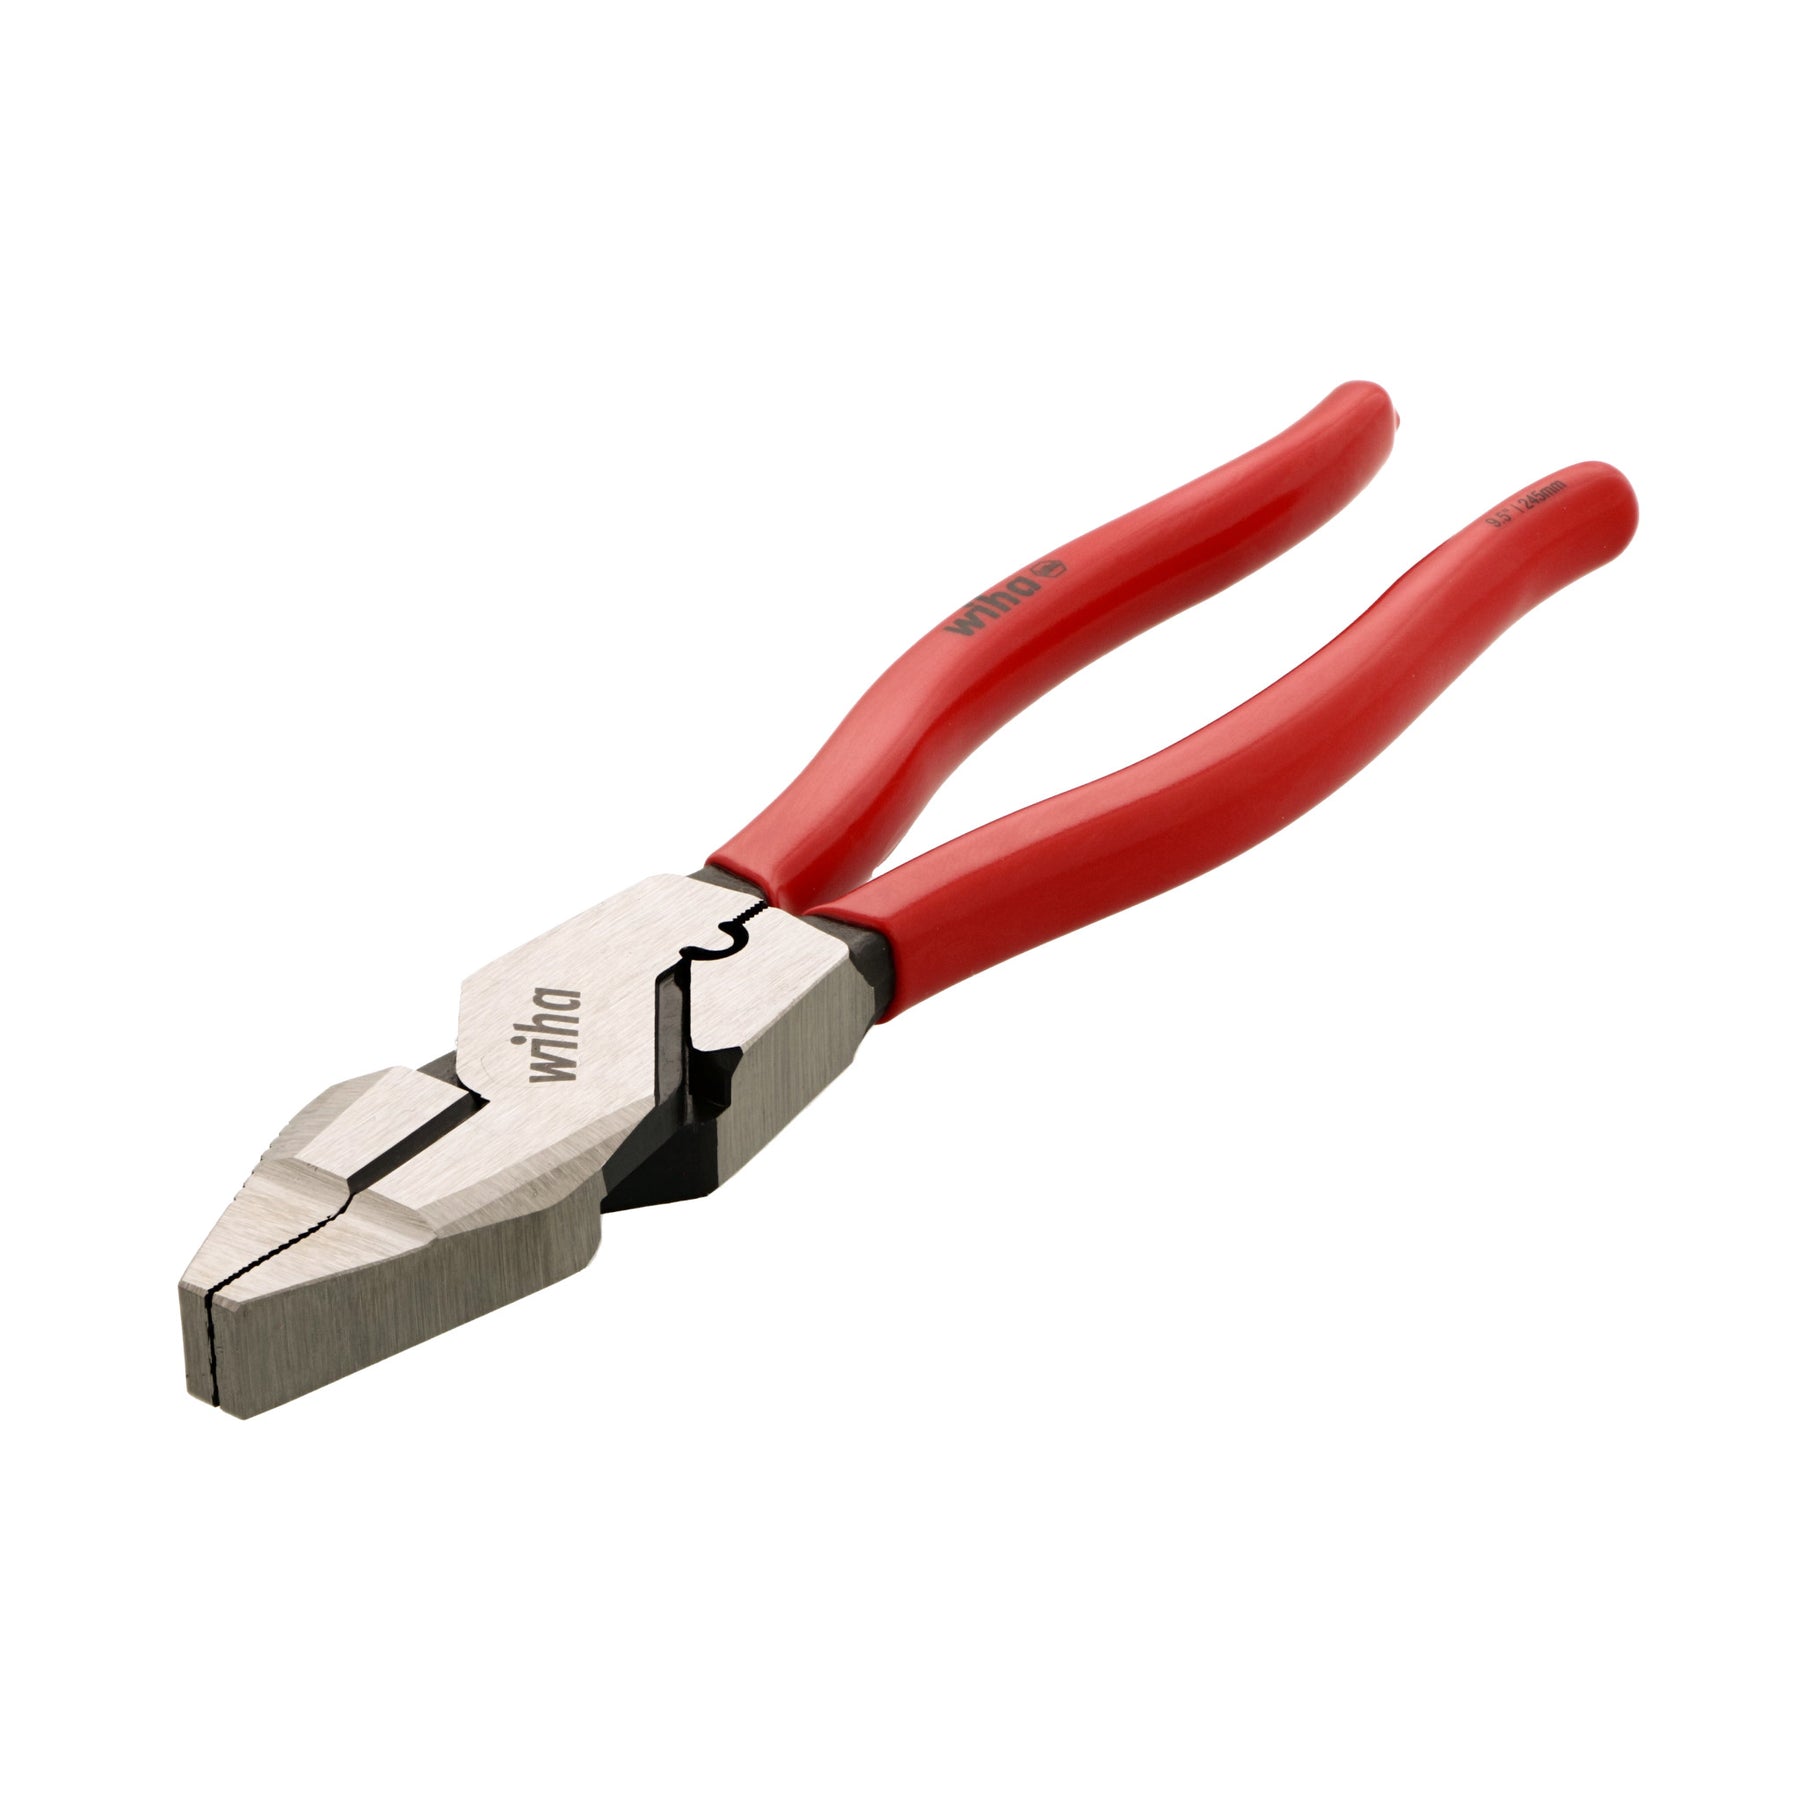 Classic Grip NE Style Lineman’s Pliers with Crimpers 9.5"